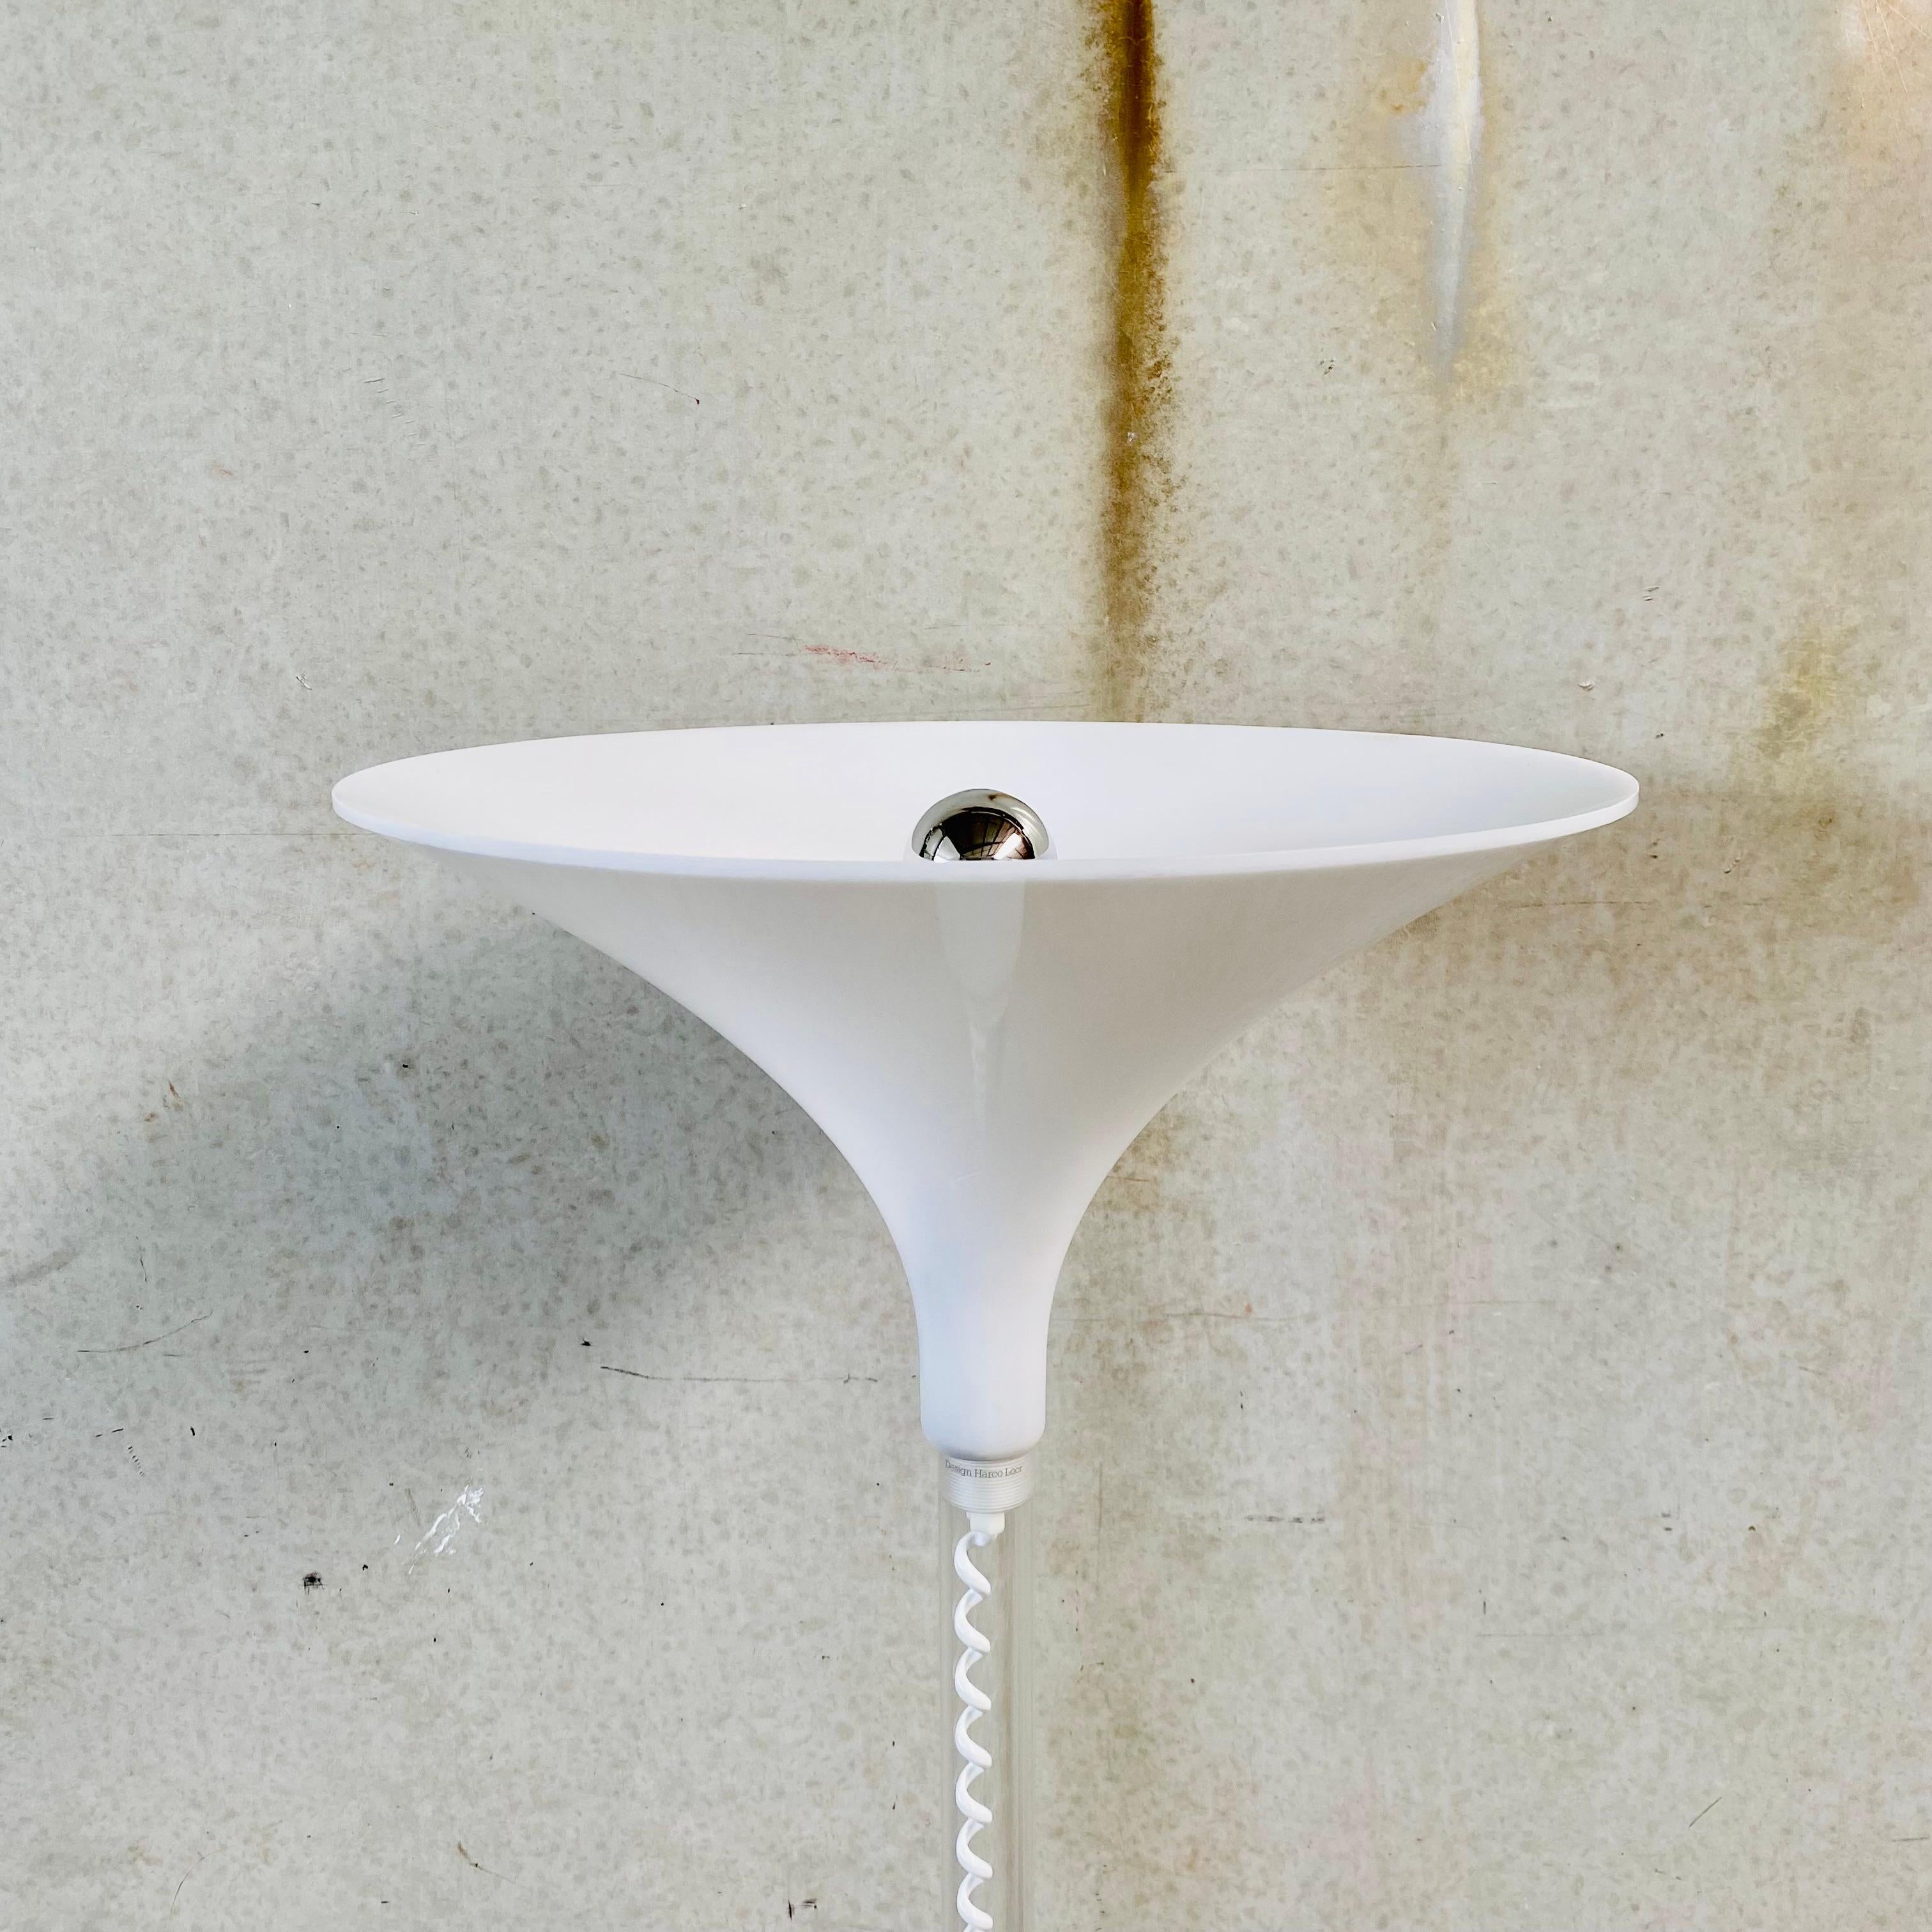 Mid-Century Modern Mid-century lucite Floor Lamp by Harco Loor, the Netherlands, 1980's For Sale